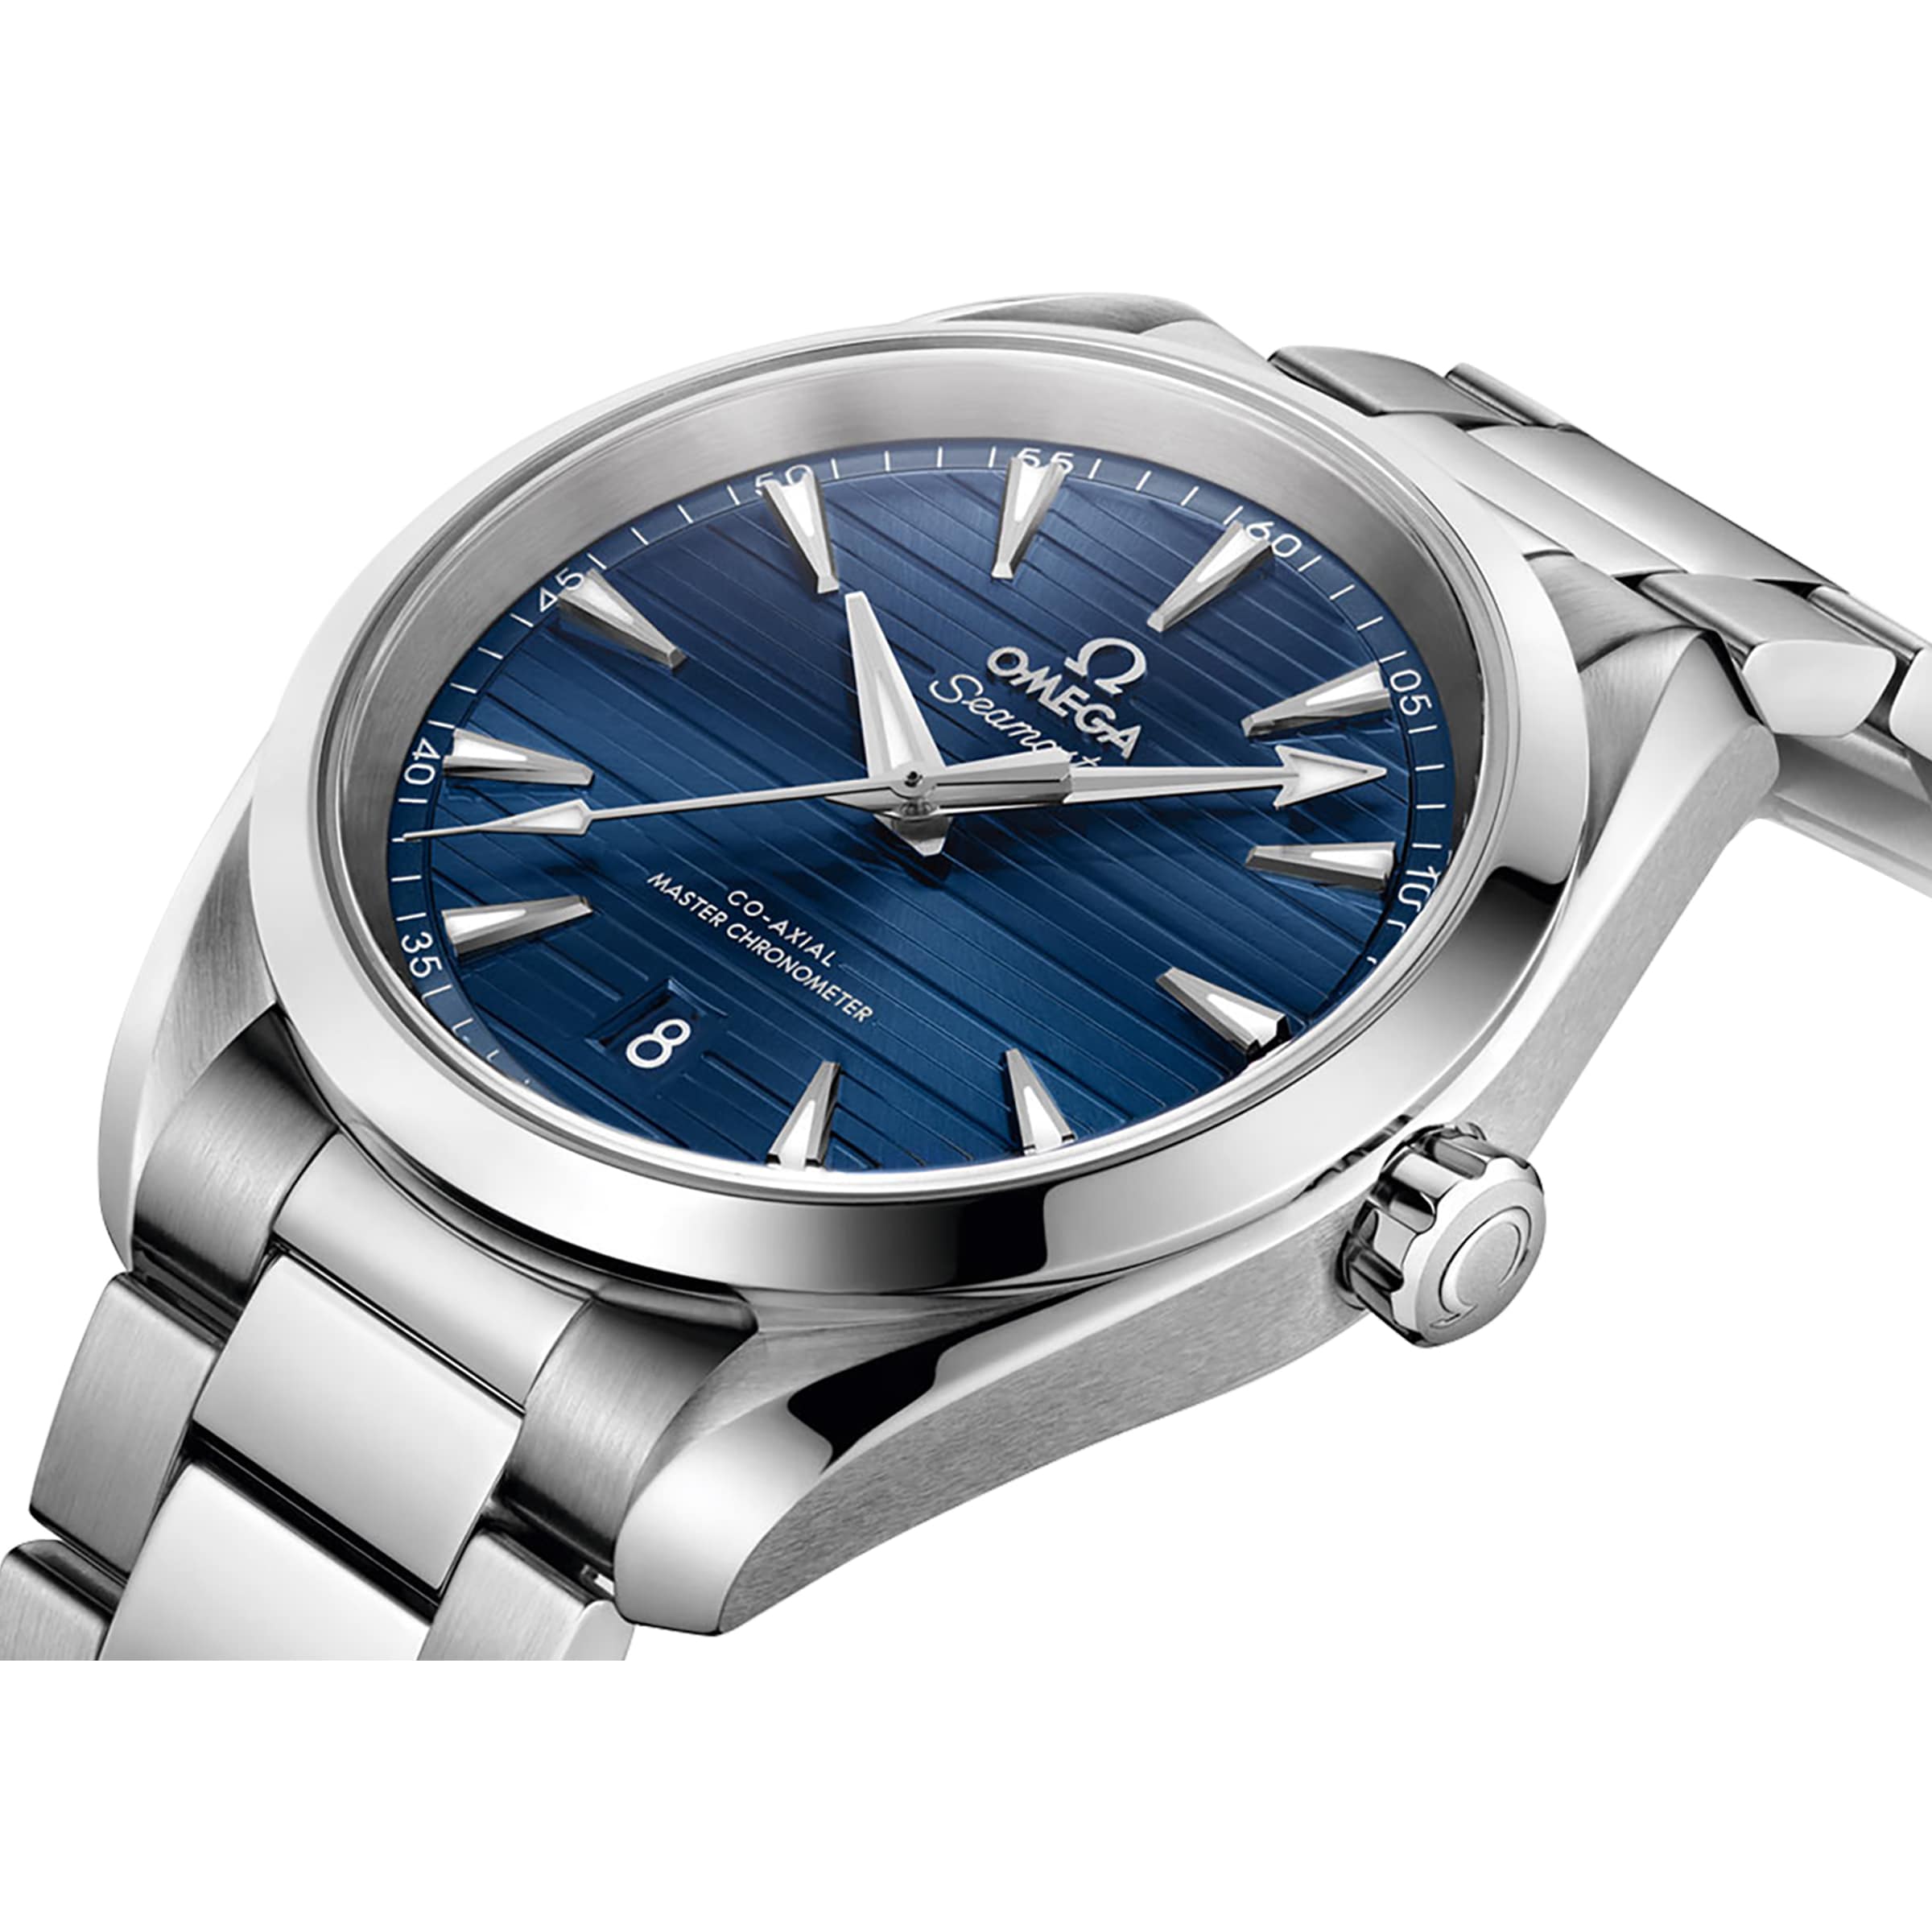 omega mens watch blue face